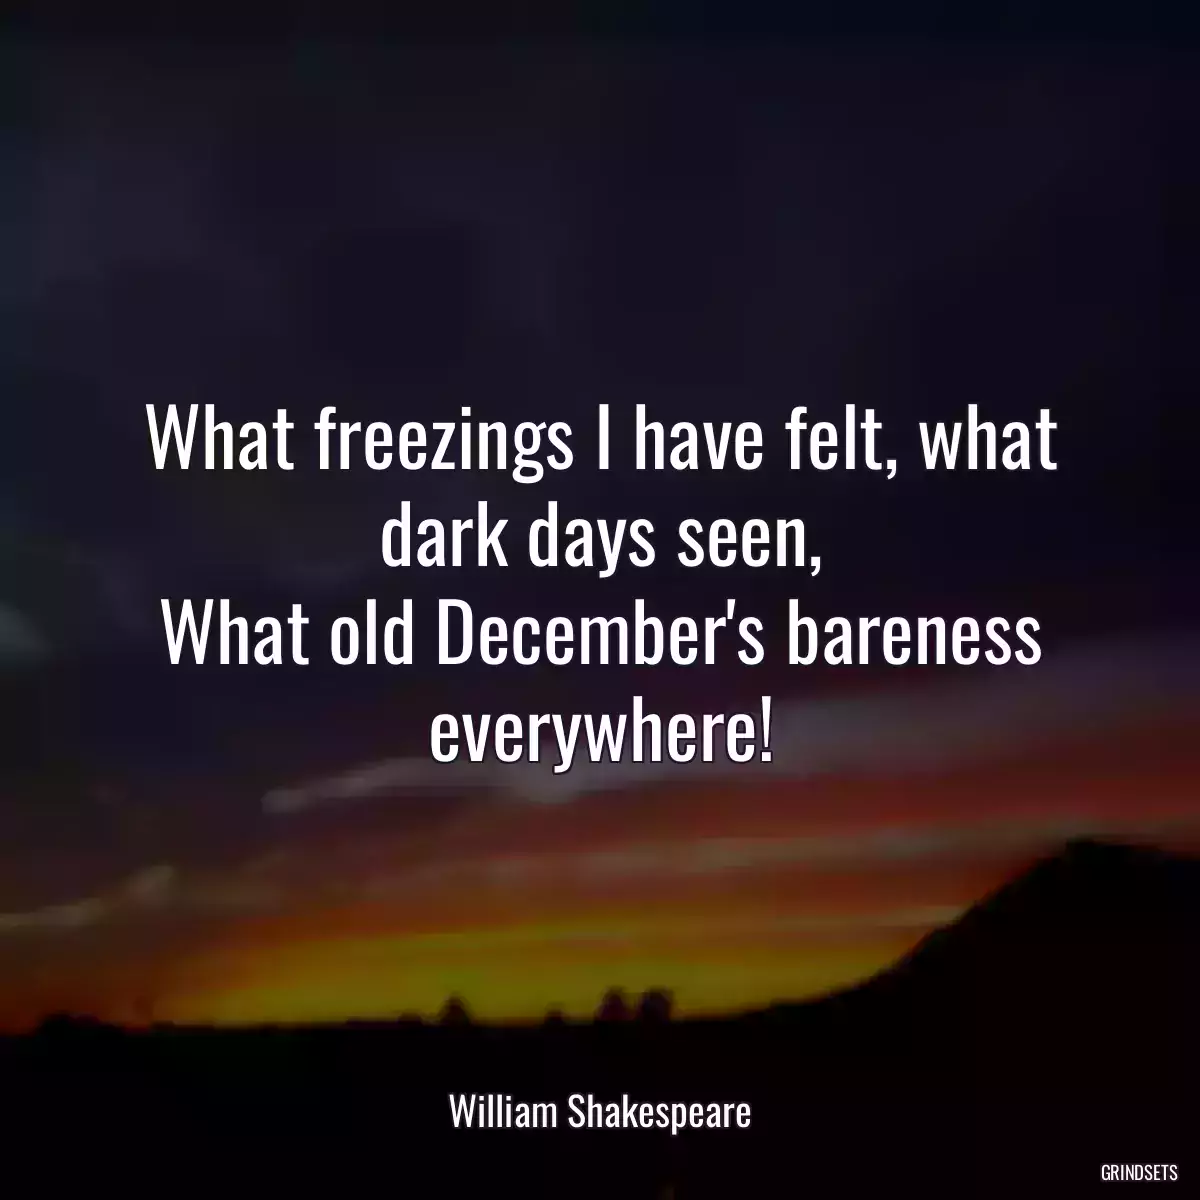 What freezings I have felt, what dark days seen,
What old December\'s bareness everywhere!